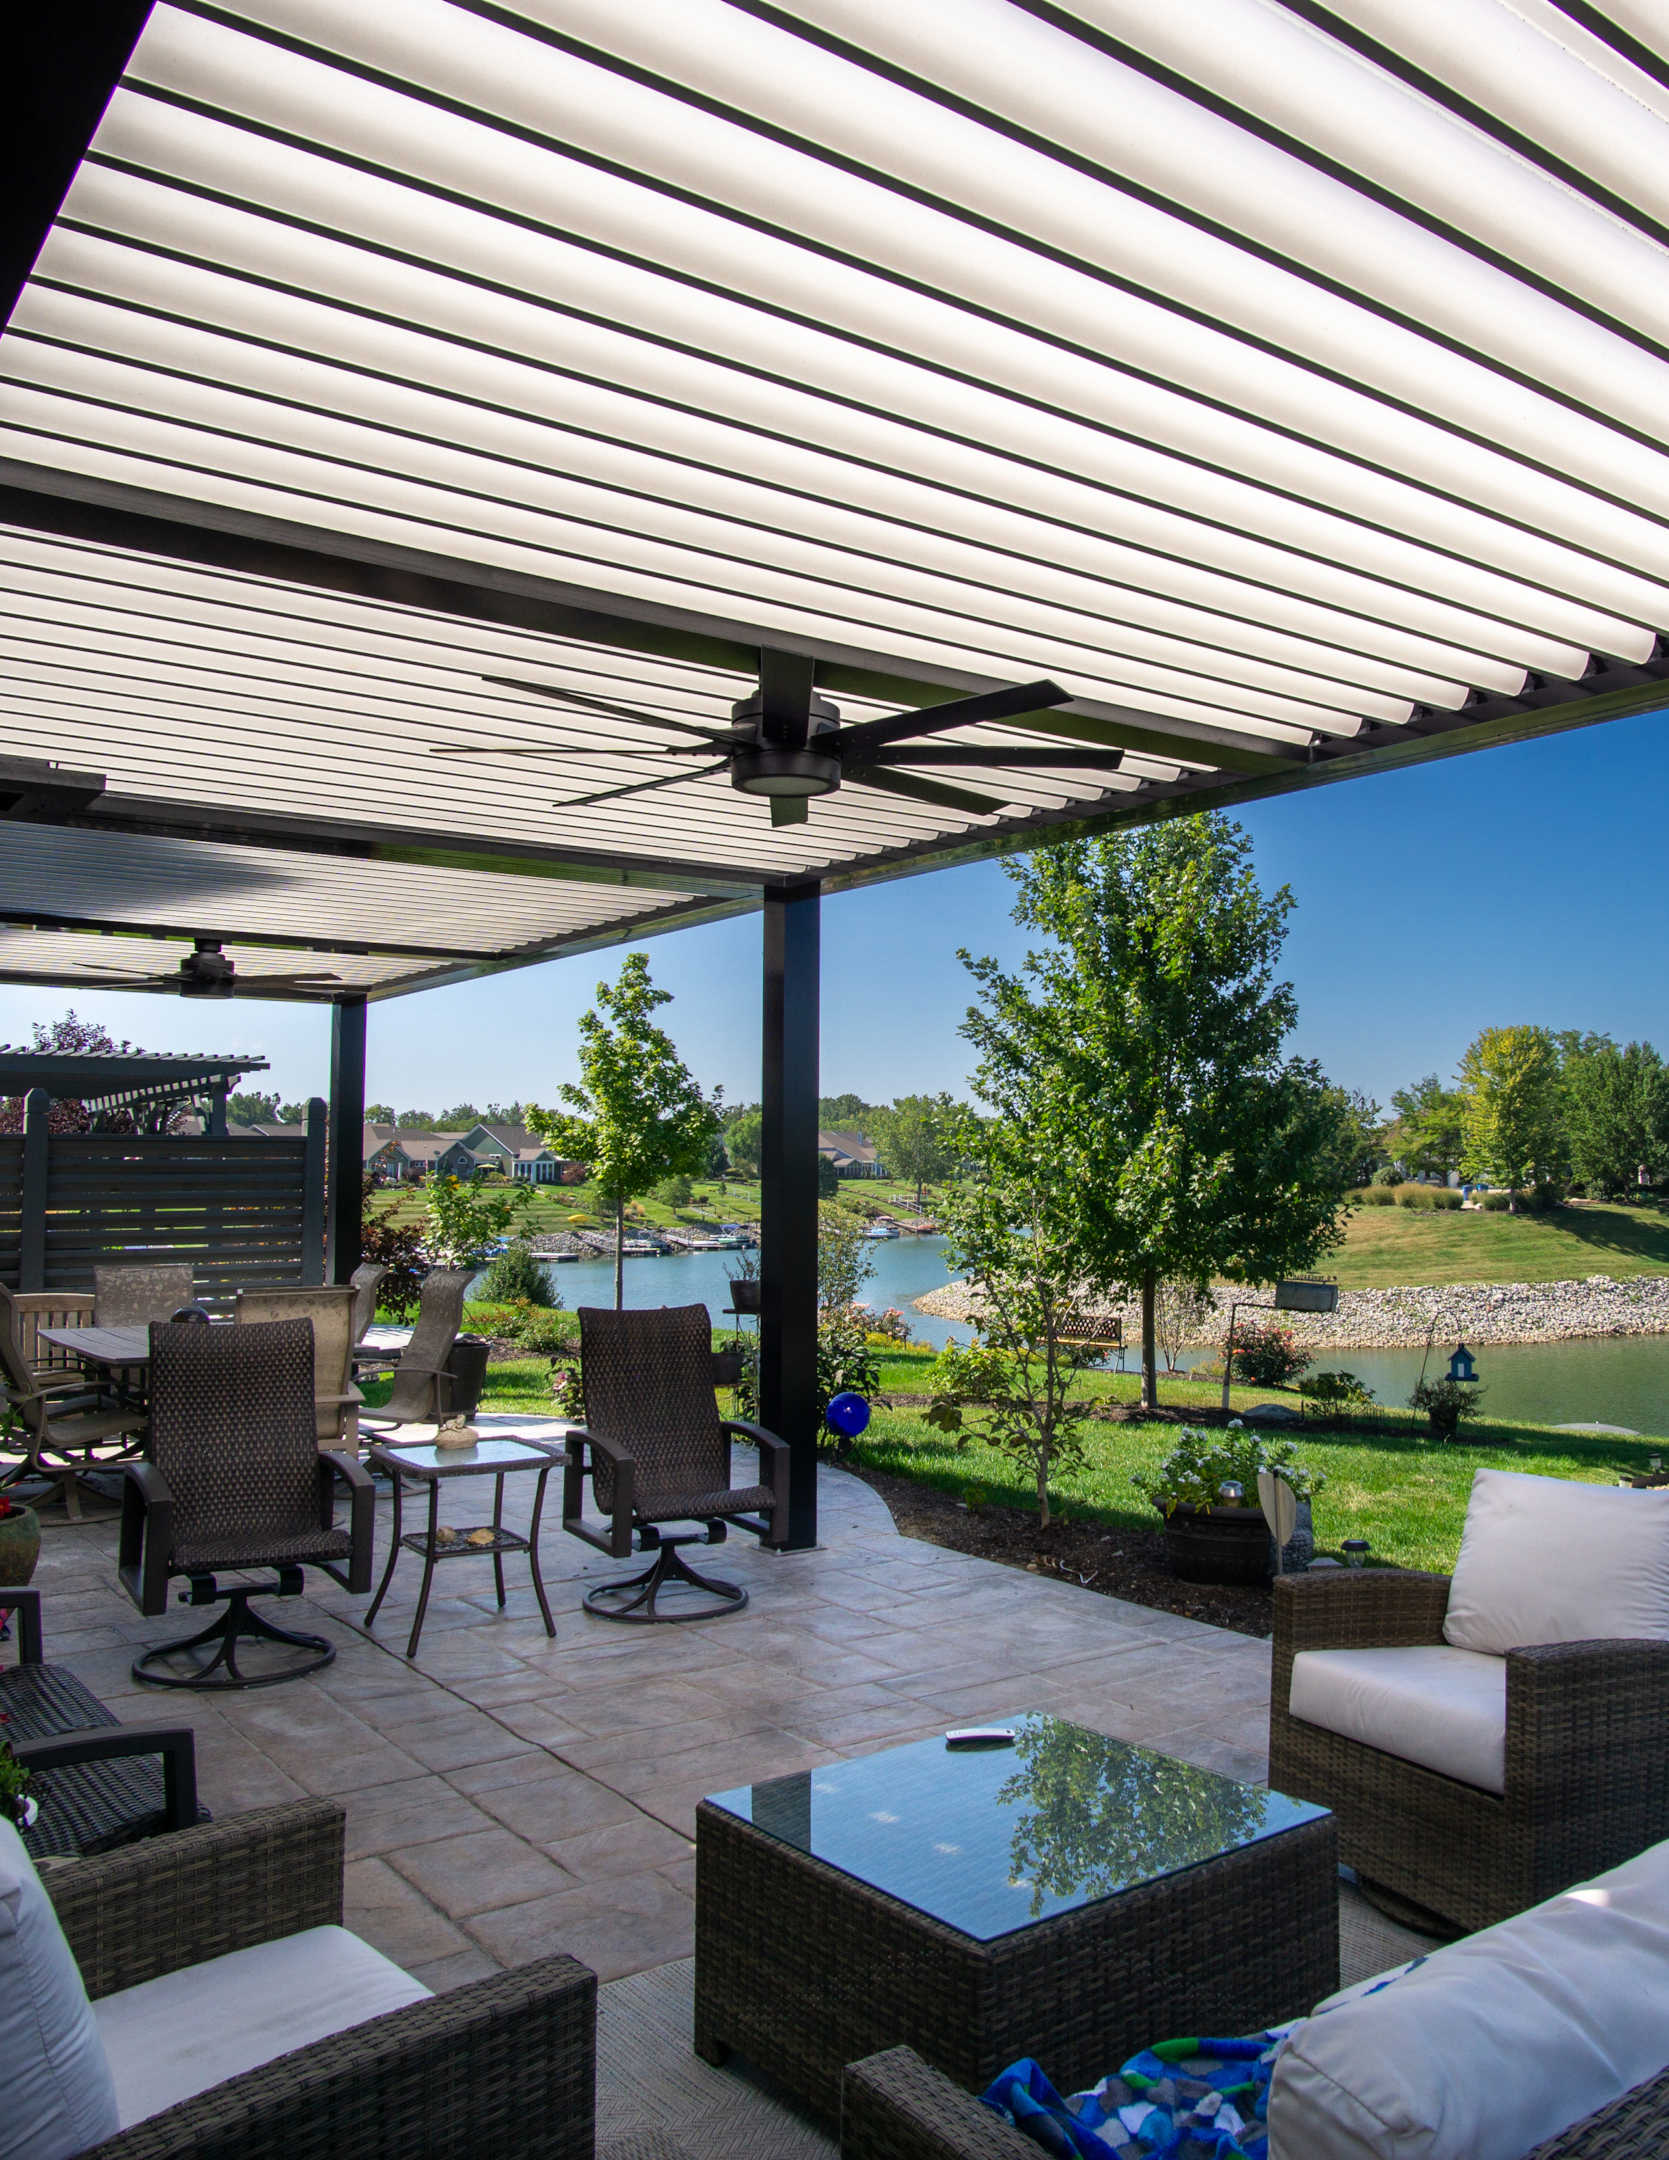 Outdoor Living made better with furniture features under pergola